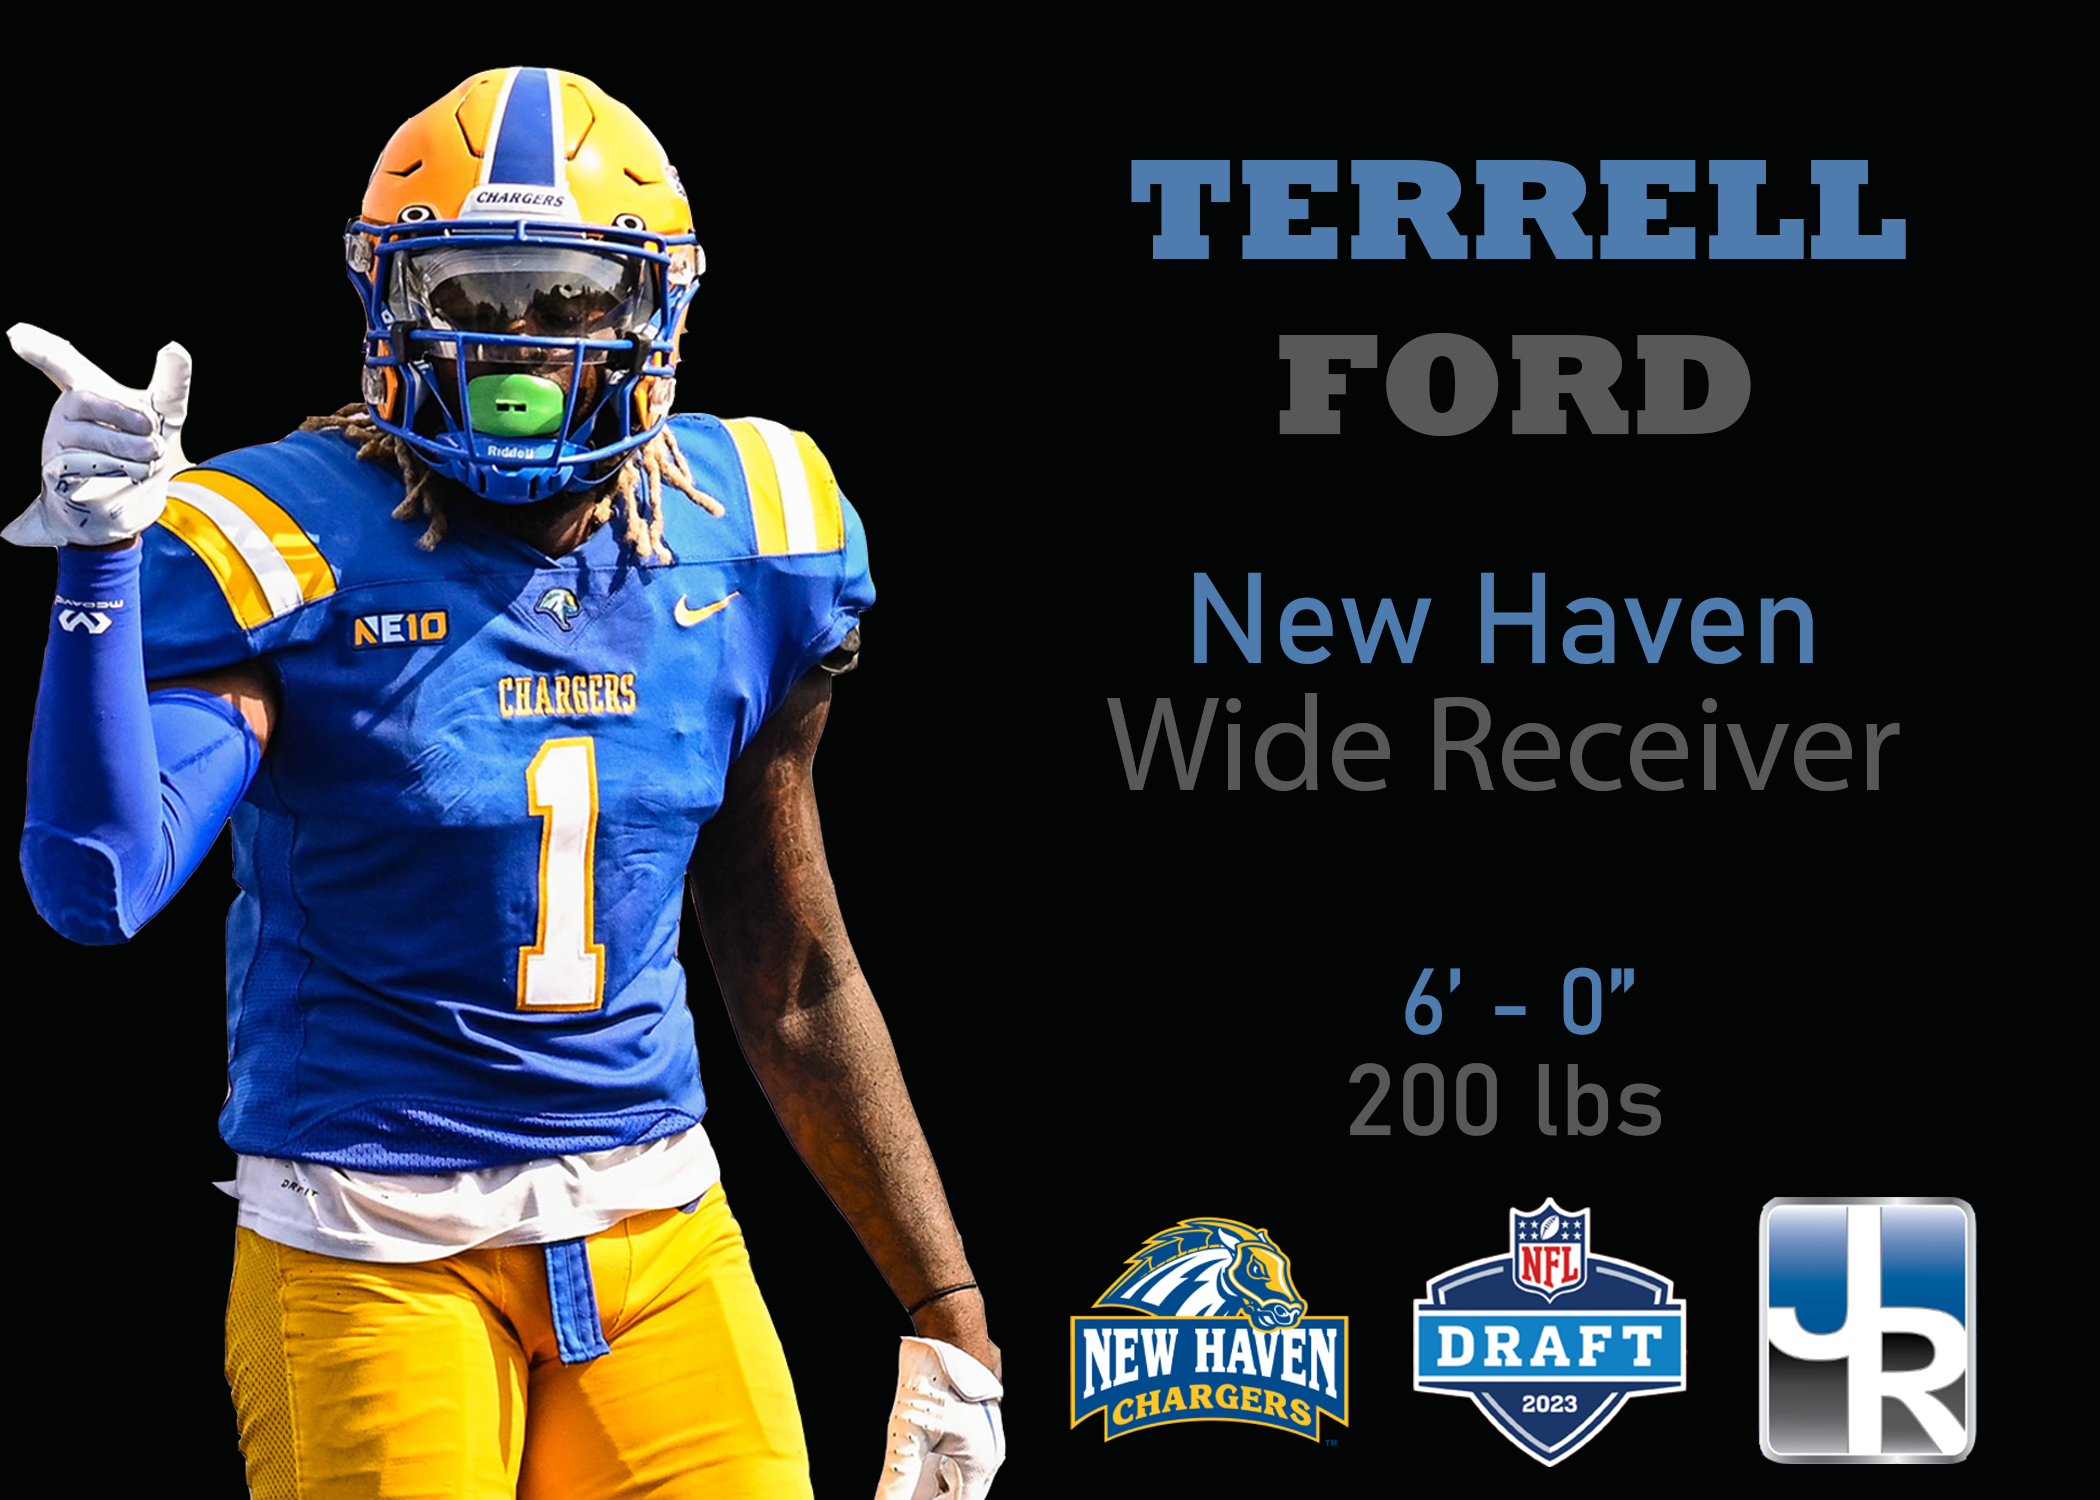 Terrell Ford website.png